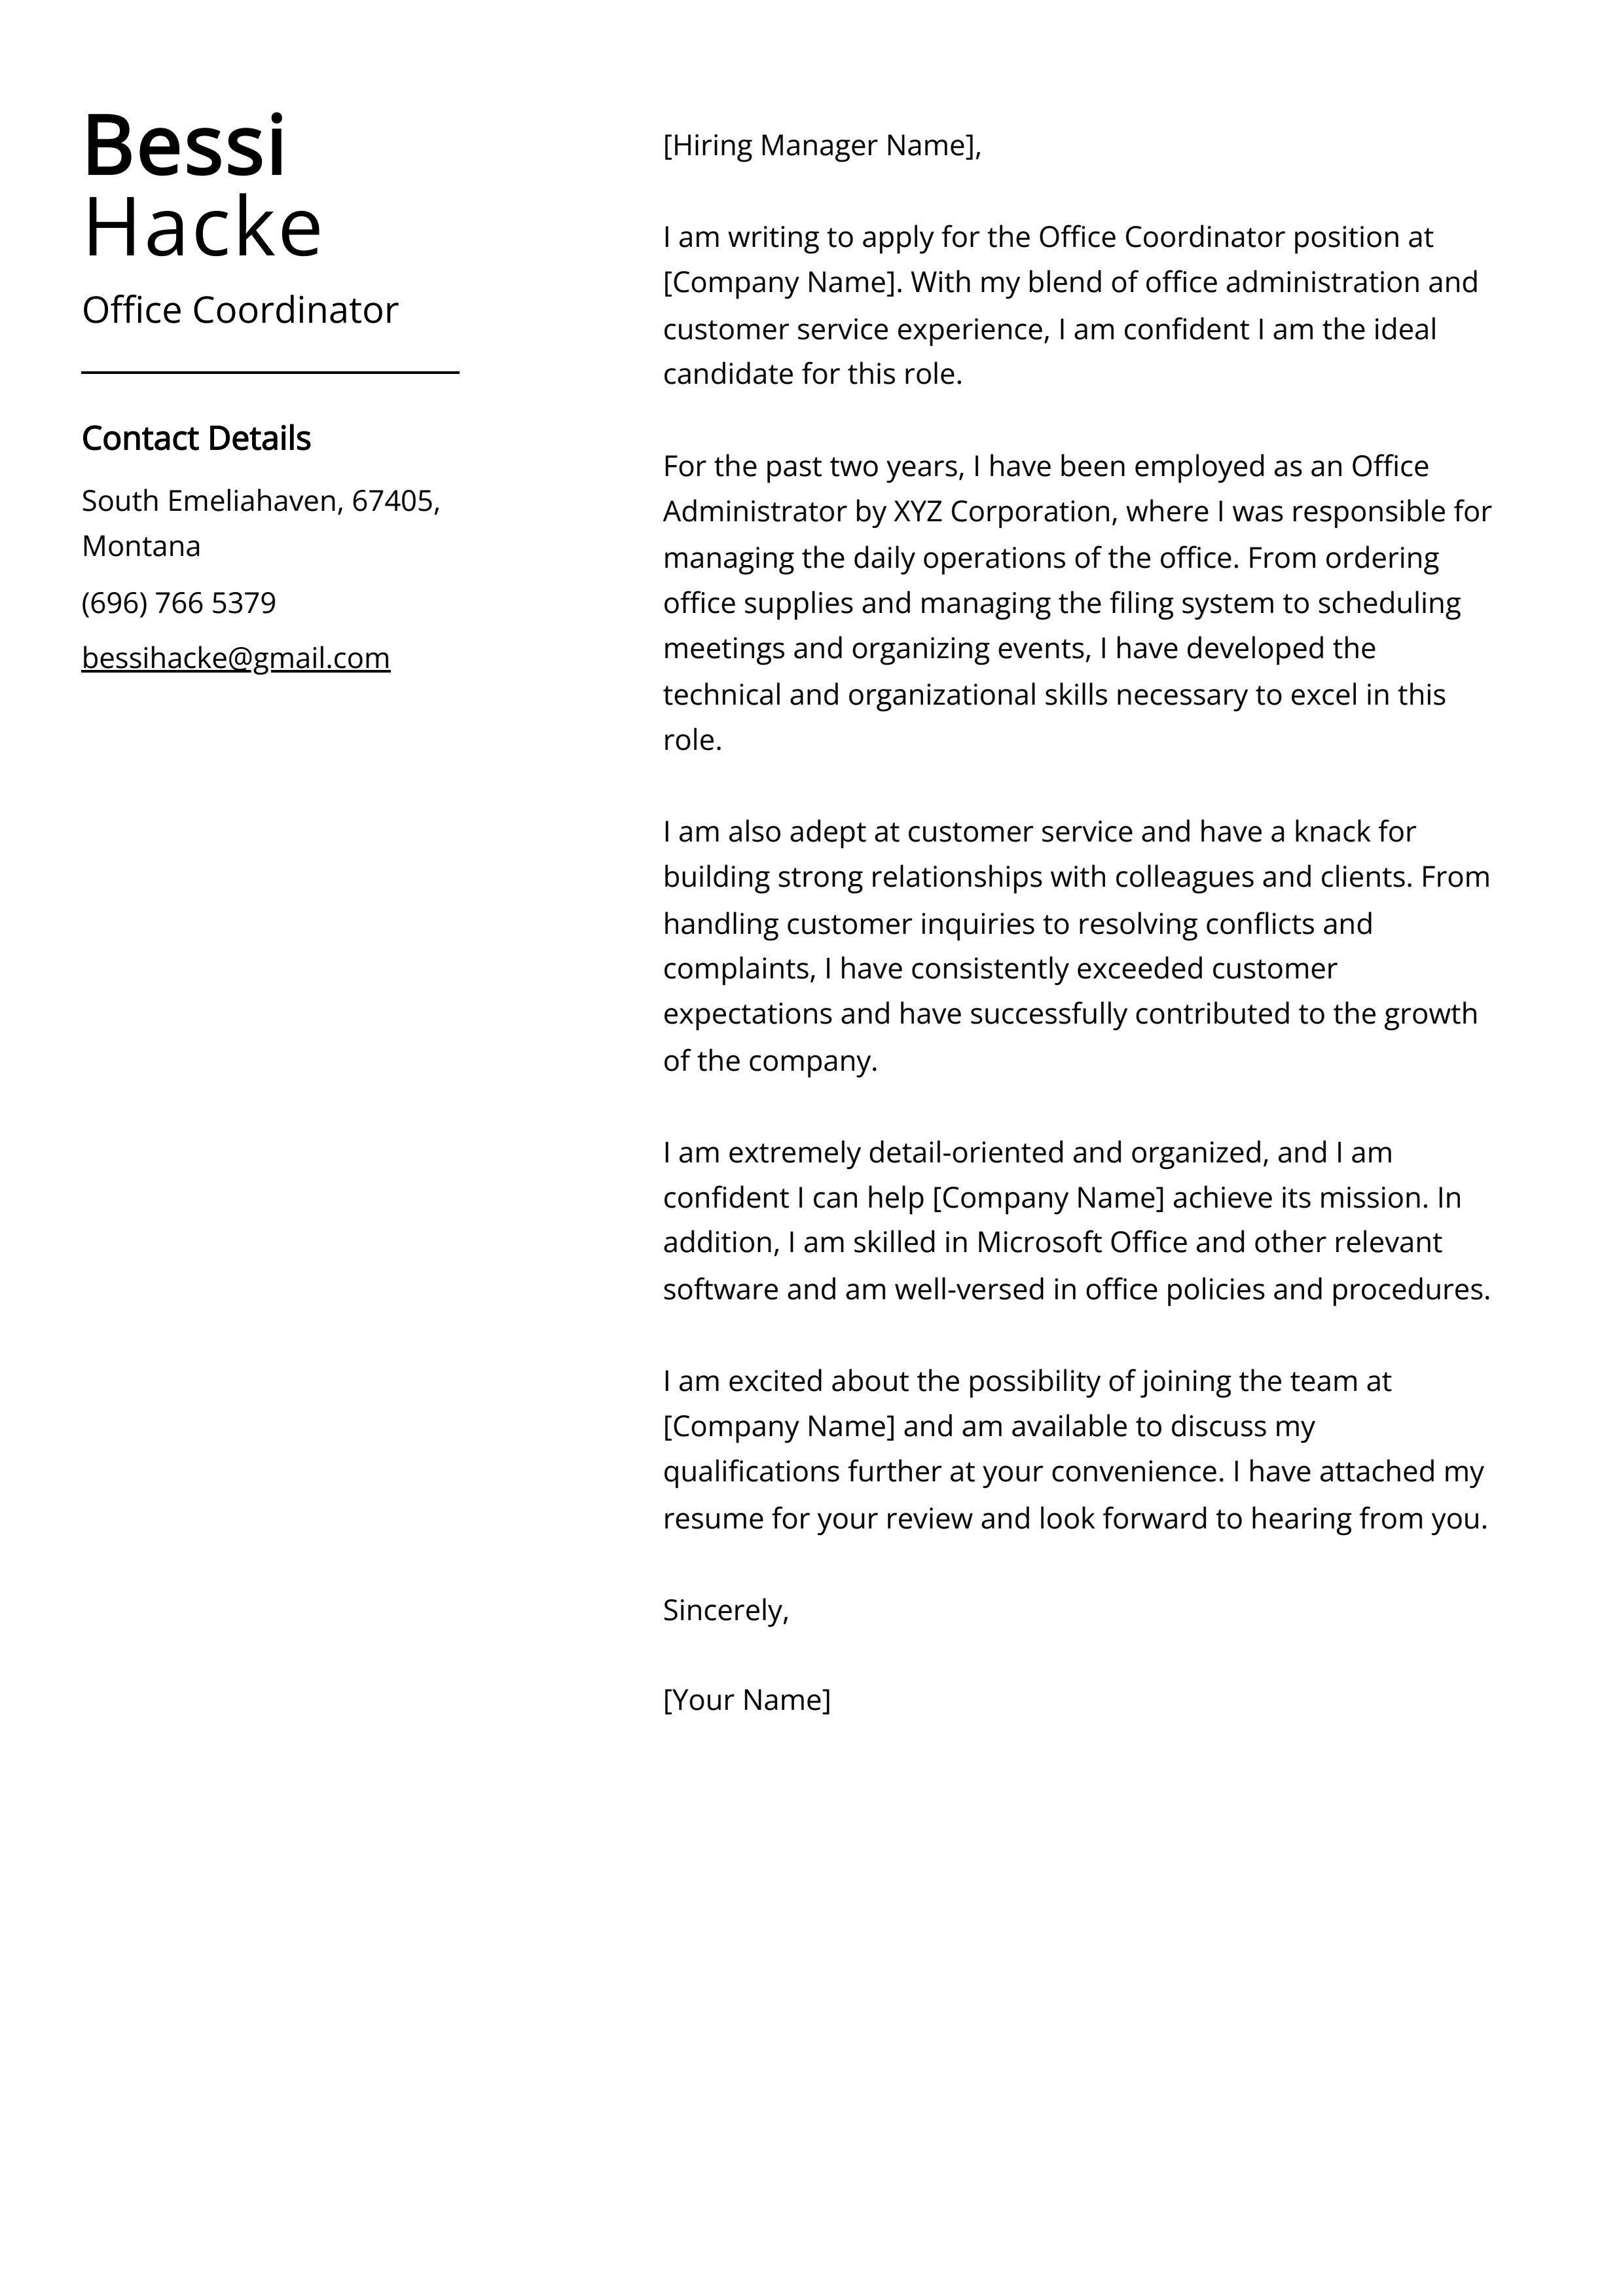 Office Coordinator Cover Letter Example